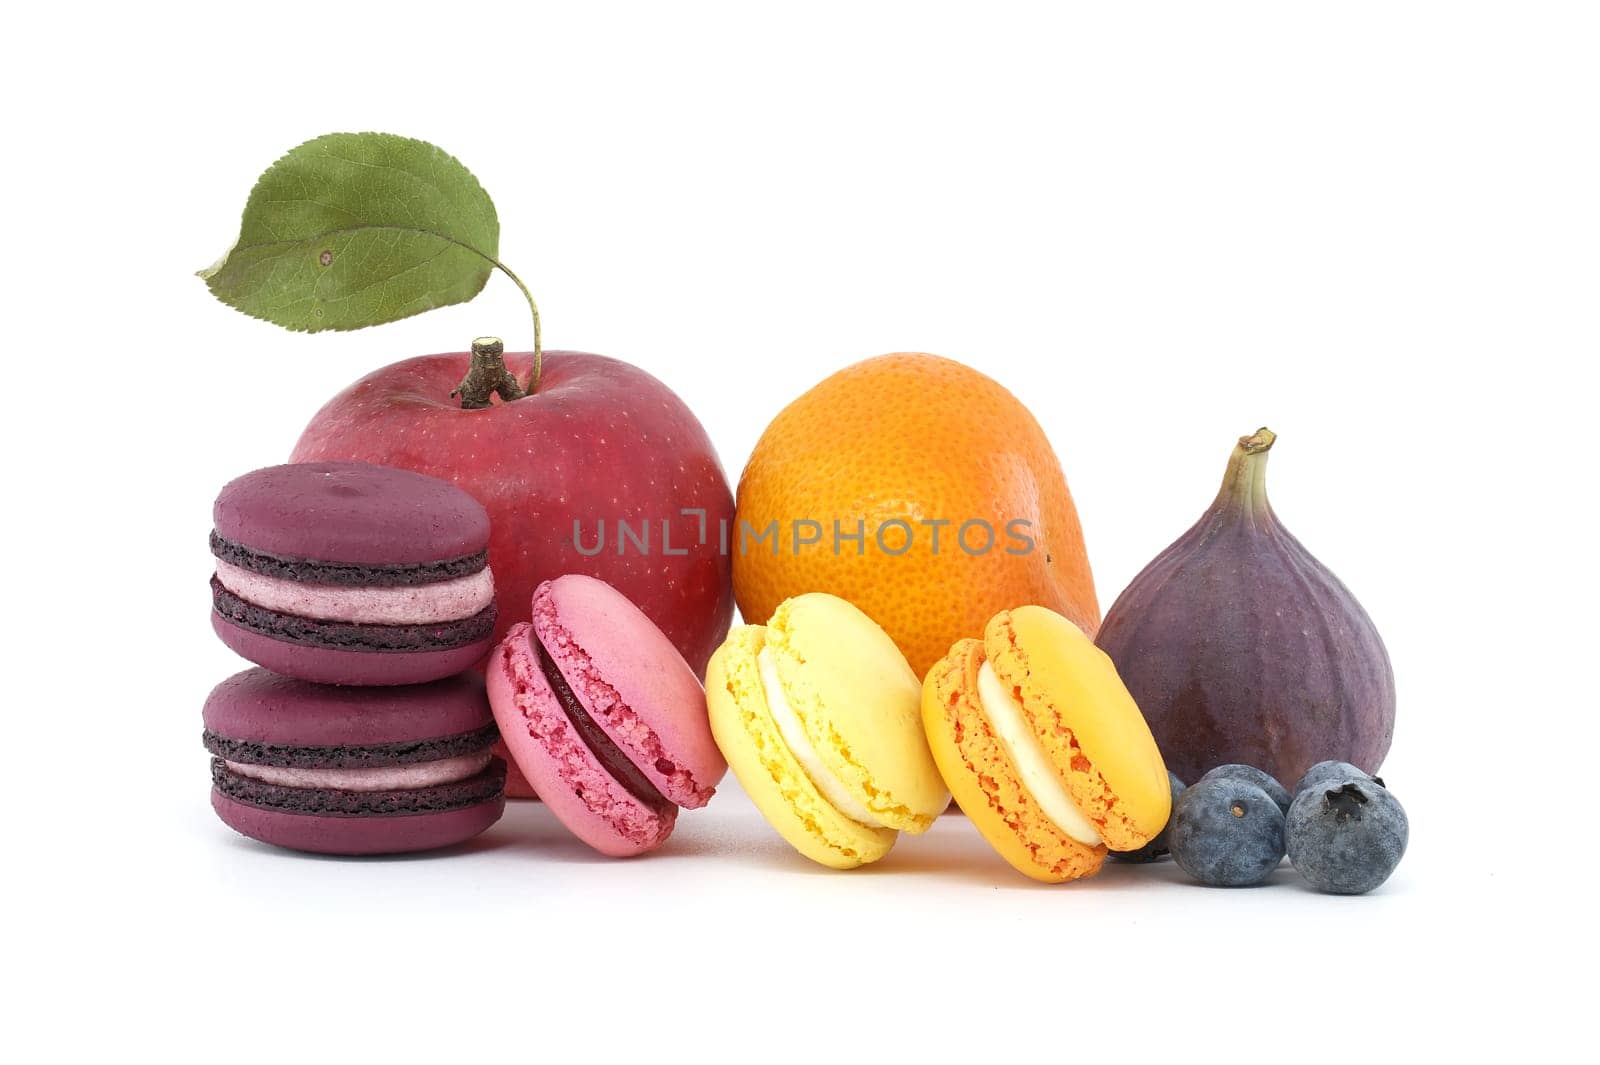 Colorful French macarons and assortment of fruits isolated on white background. Full depth of field